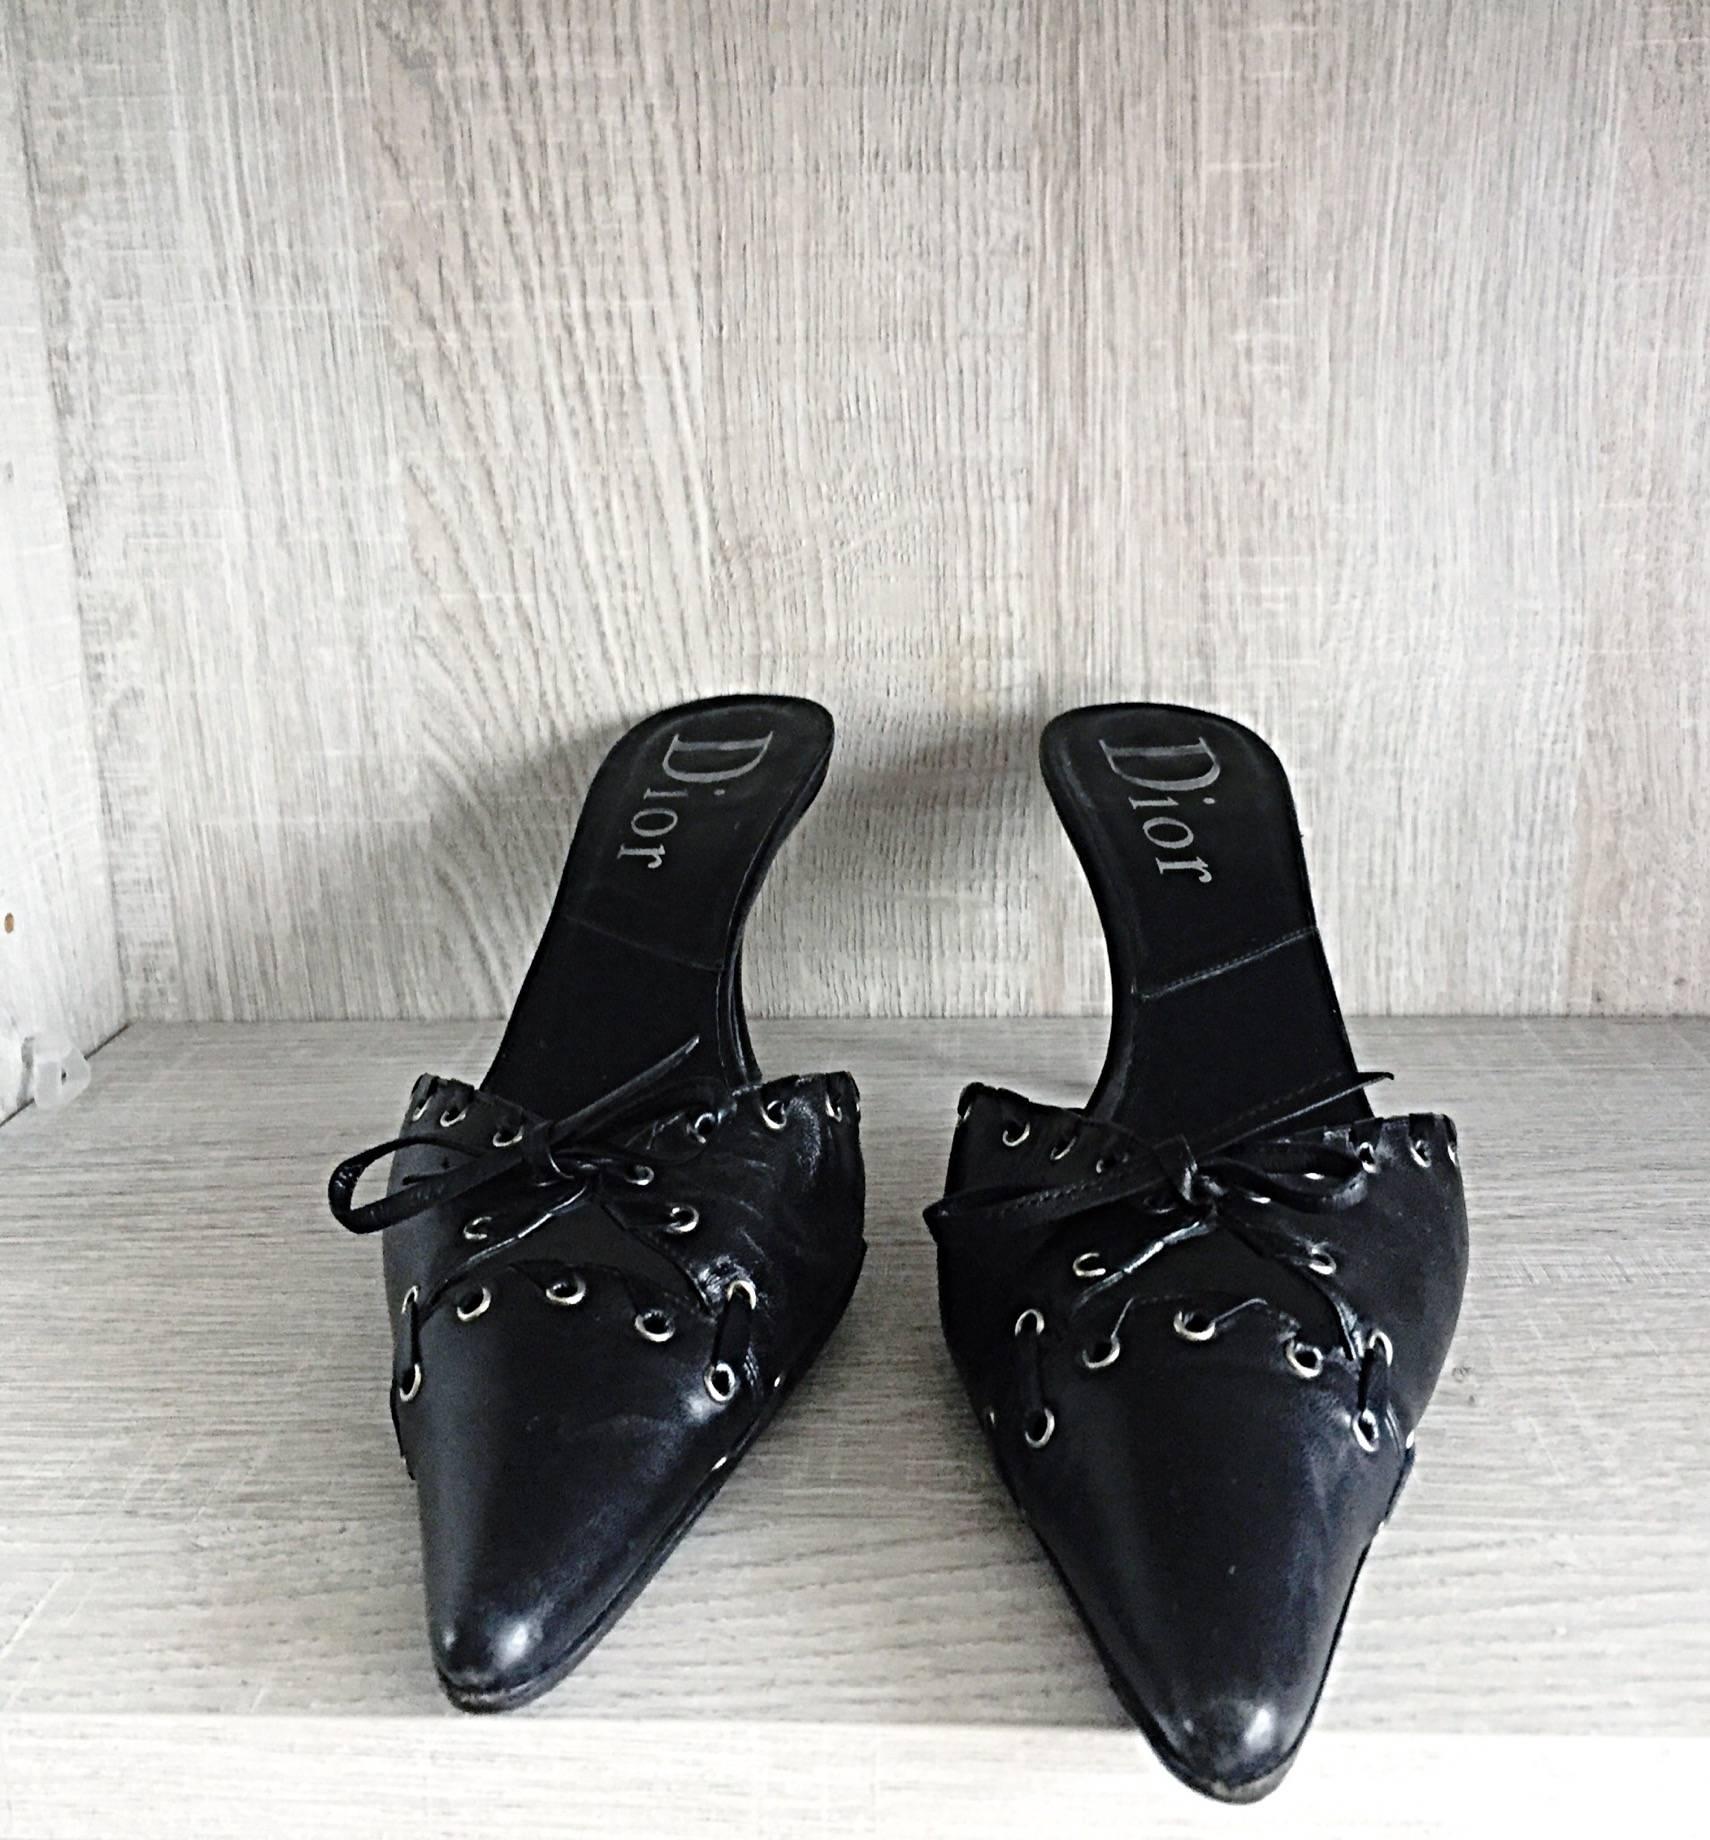 Christian Dior By John Galliano Black Leather ' Corset ' Heels Size 40.5 10.5 2